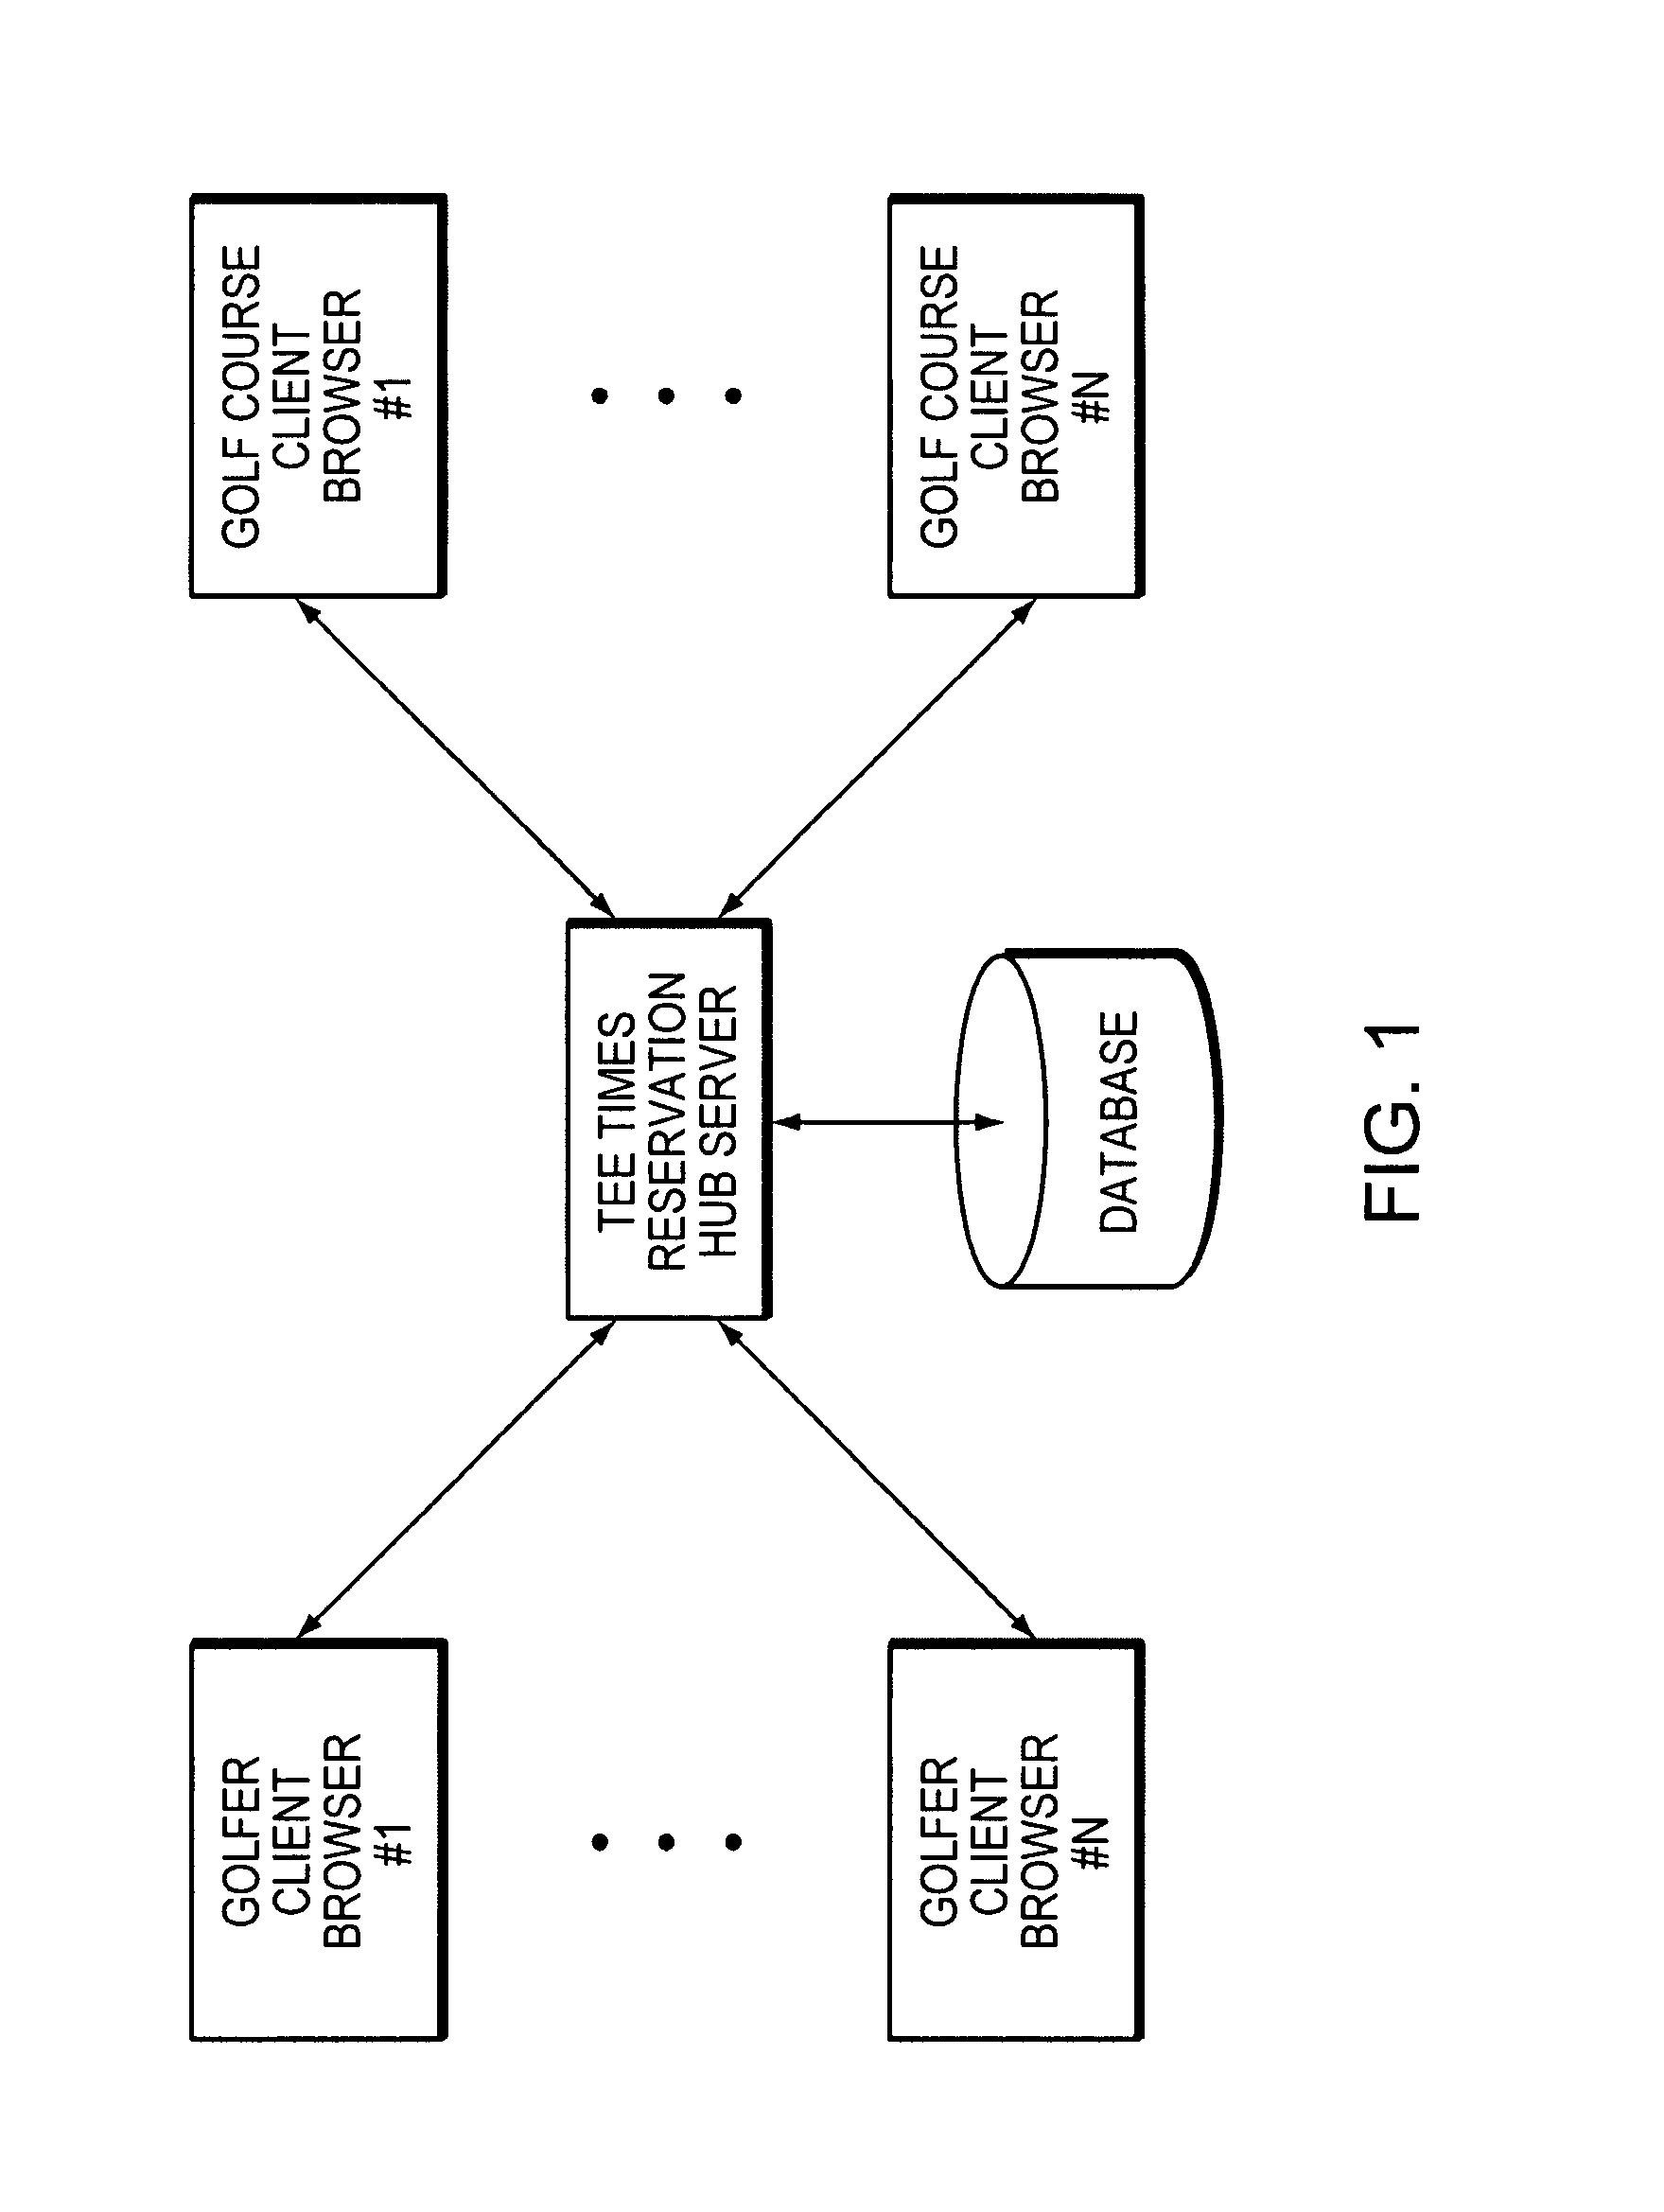 System and method for posting available time slots to a network hub